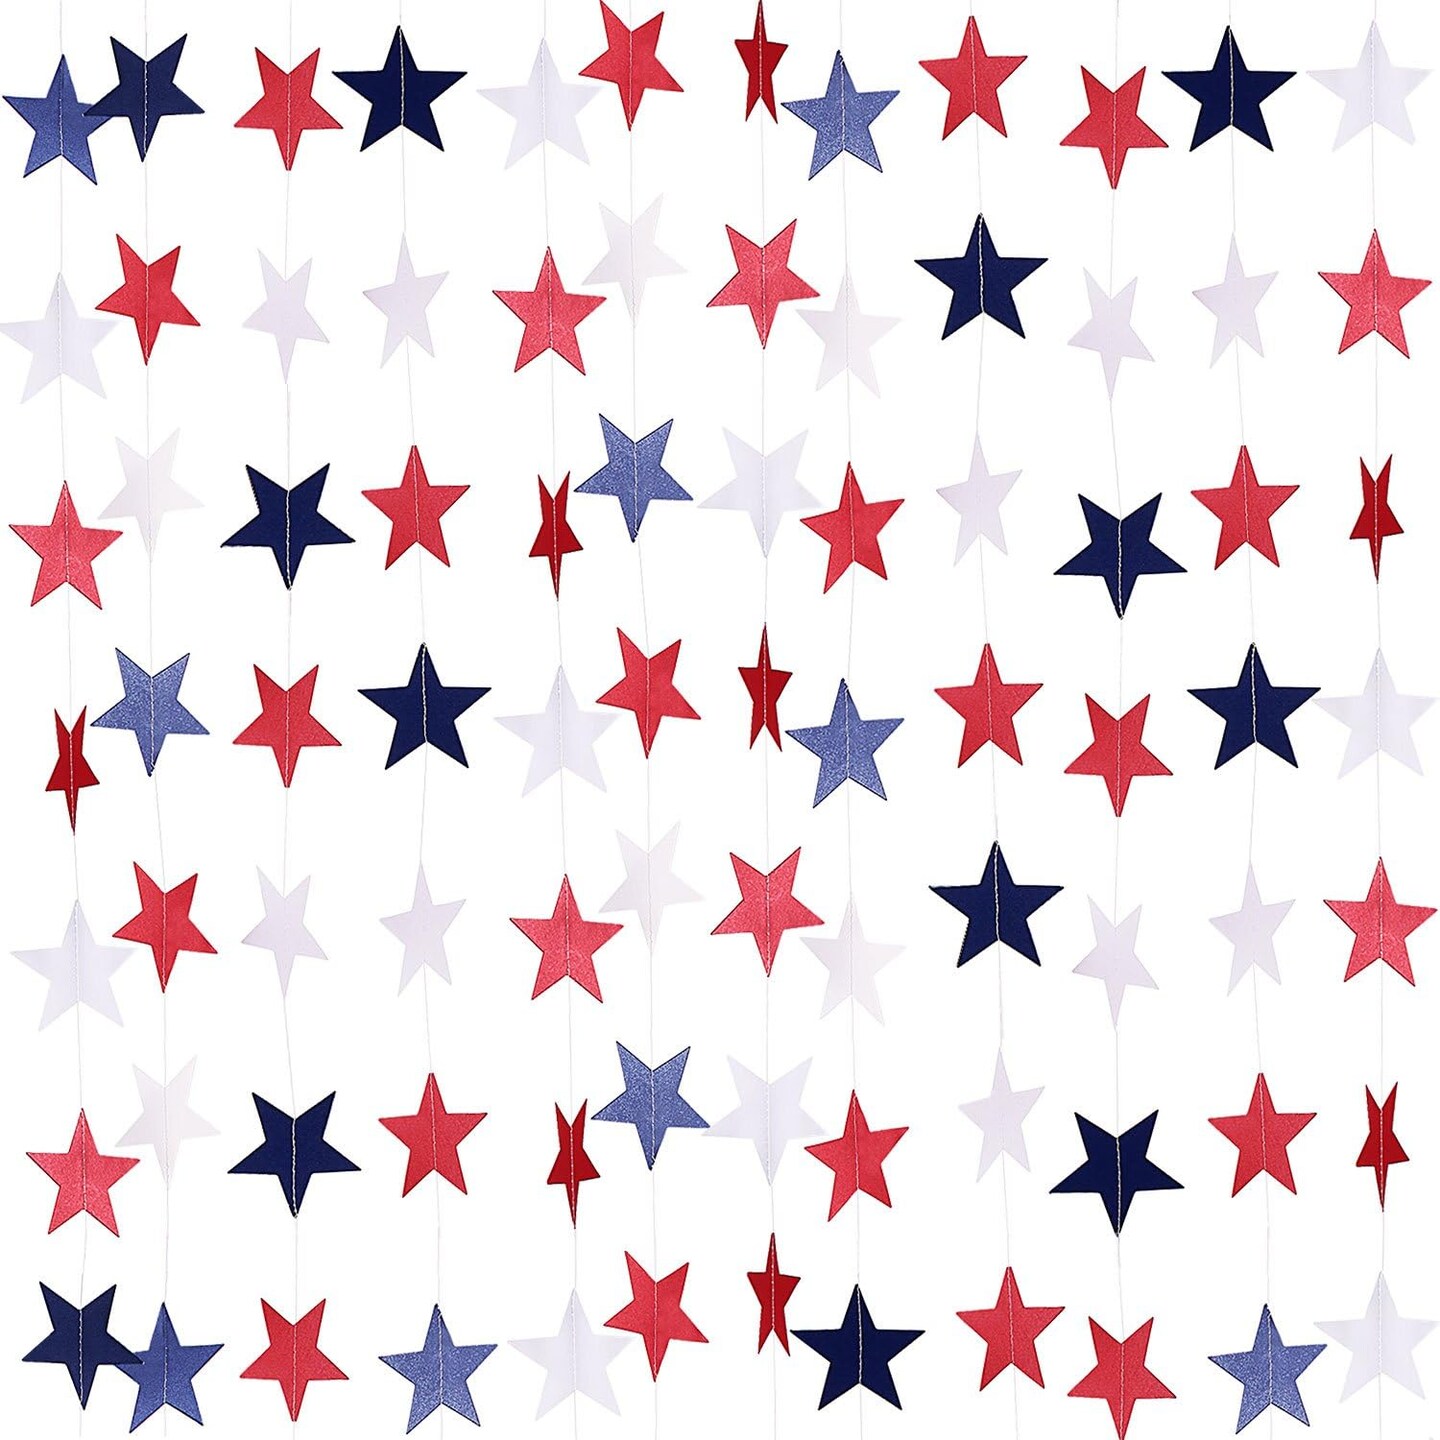 8 Strands Patriotic Star Streamers Banner Garland for 4th of July